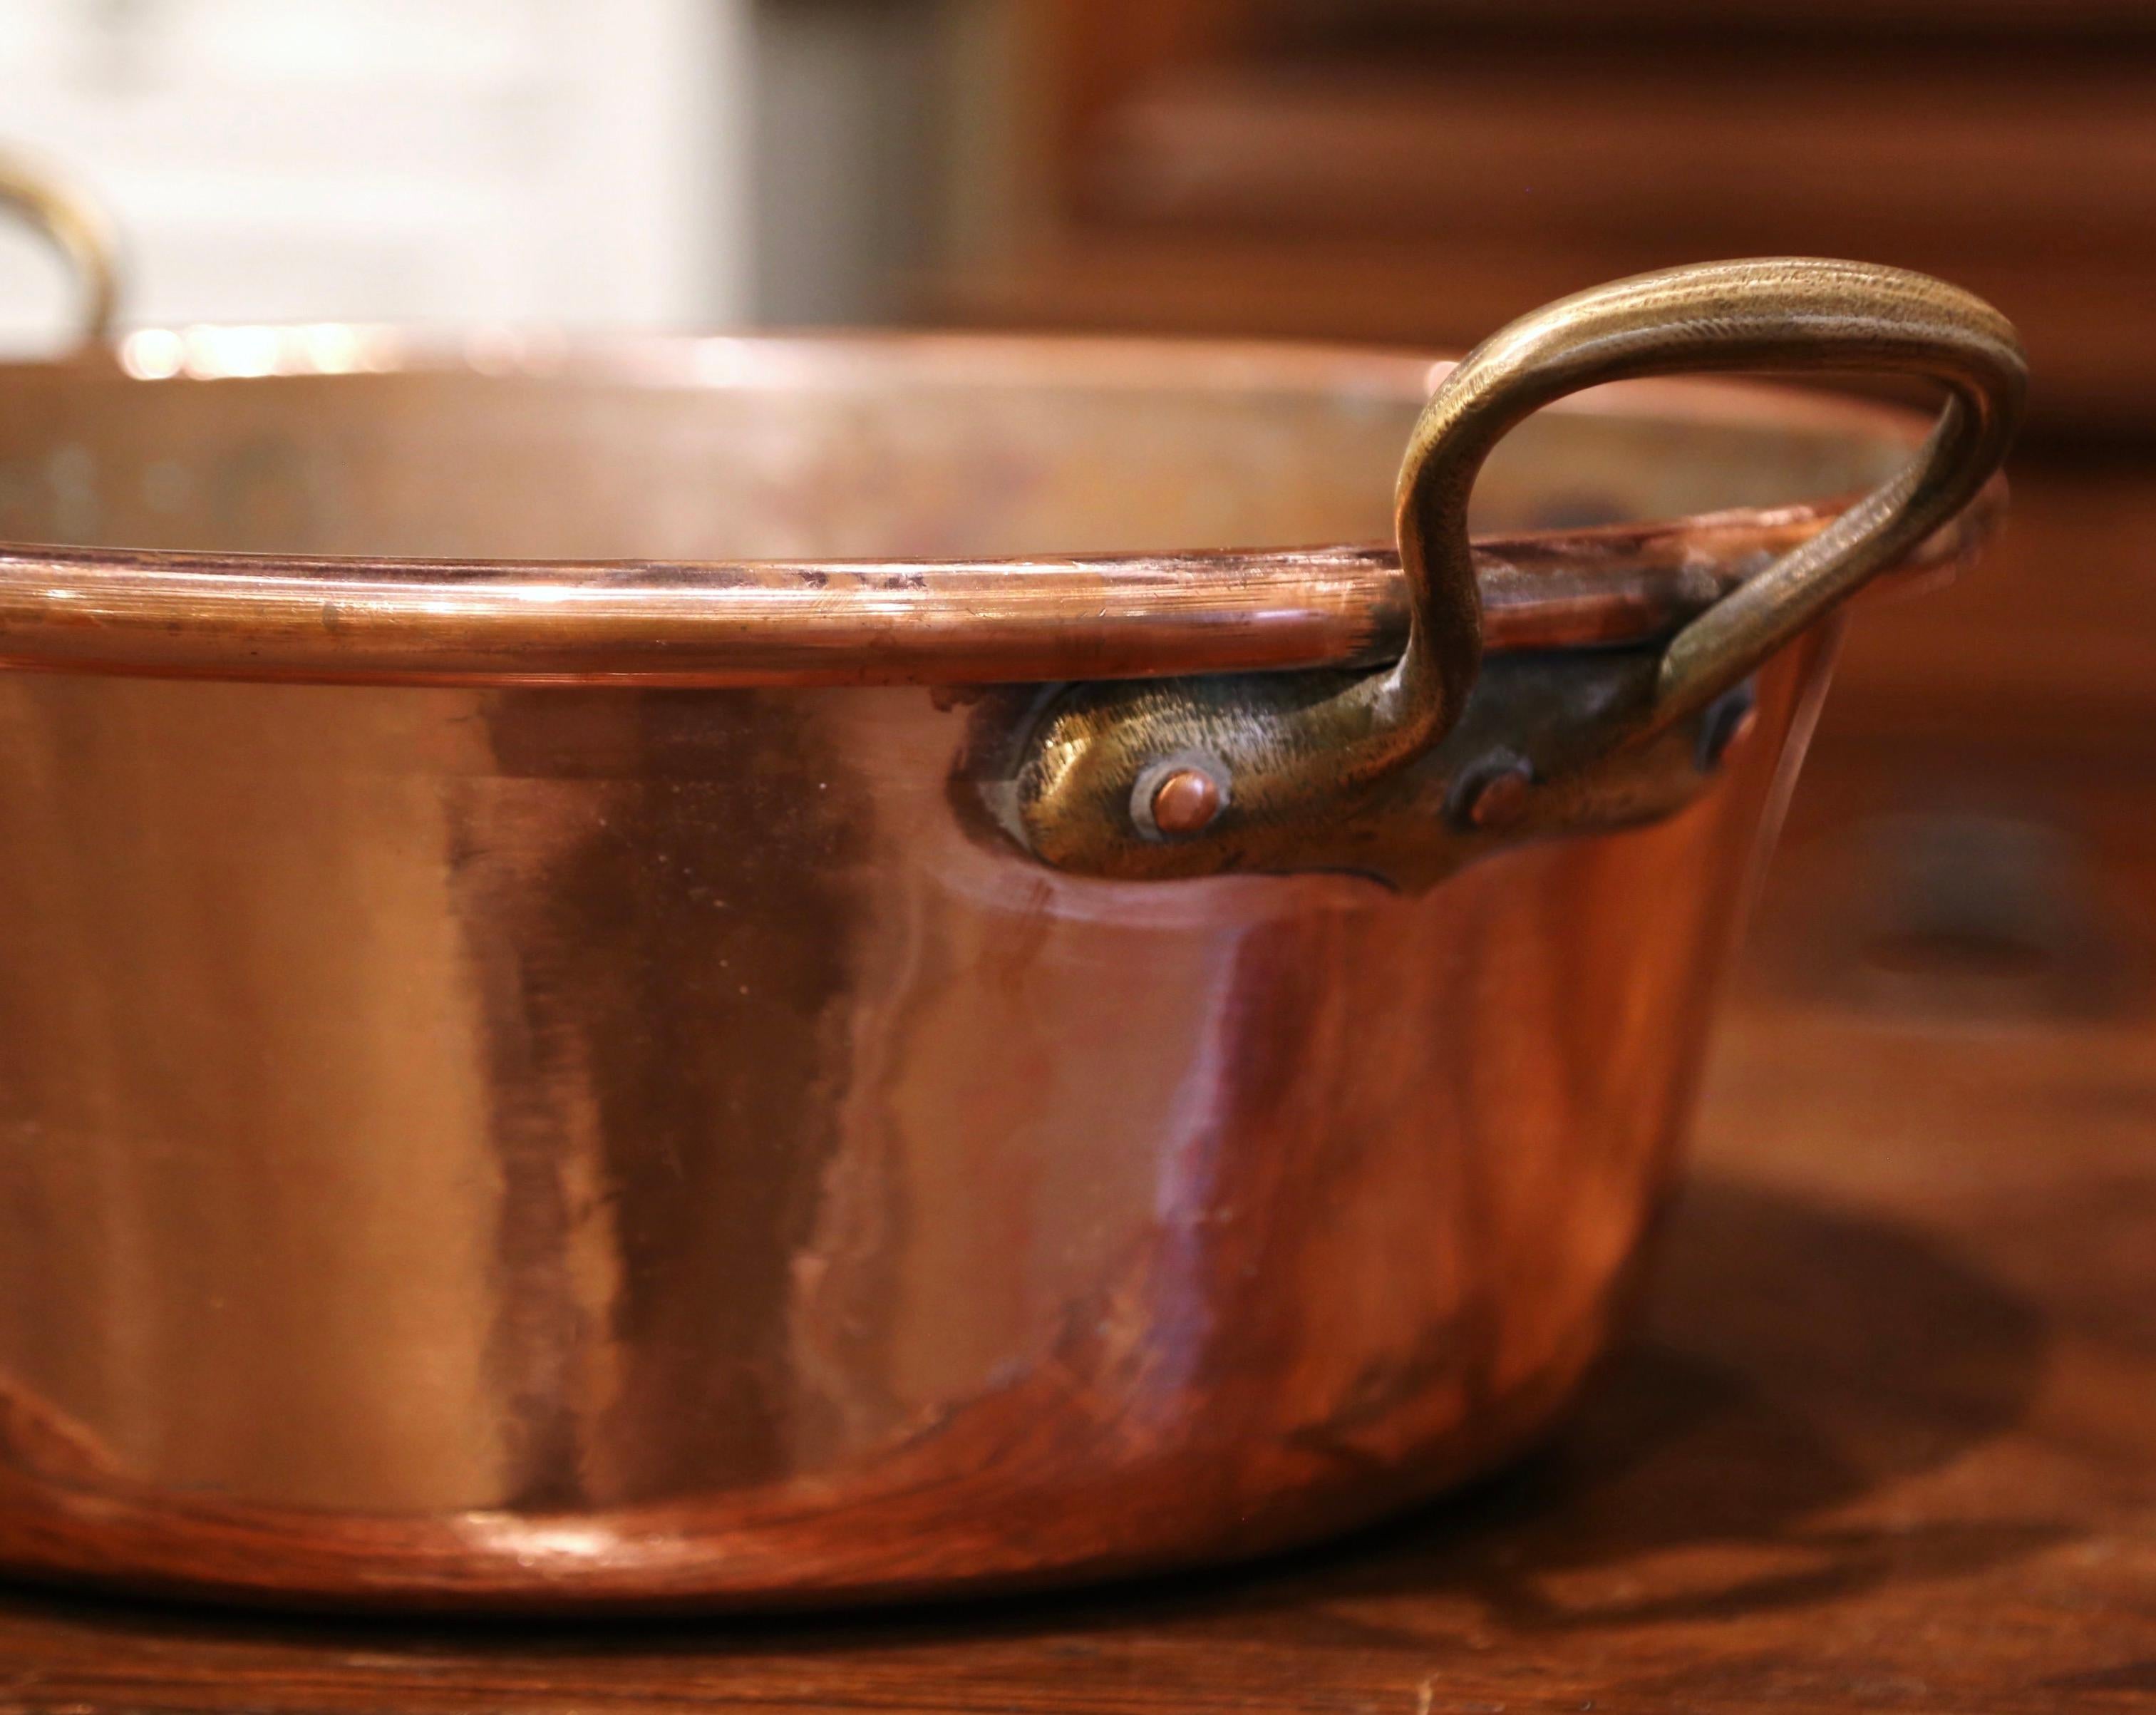 Hand-Crafted Mid-19th Century French Copper and Brass Jelly Boiling Bowl from Normandy